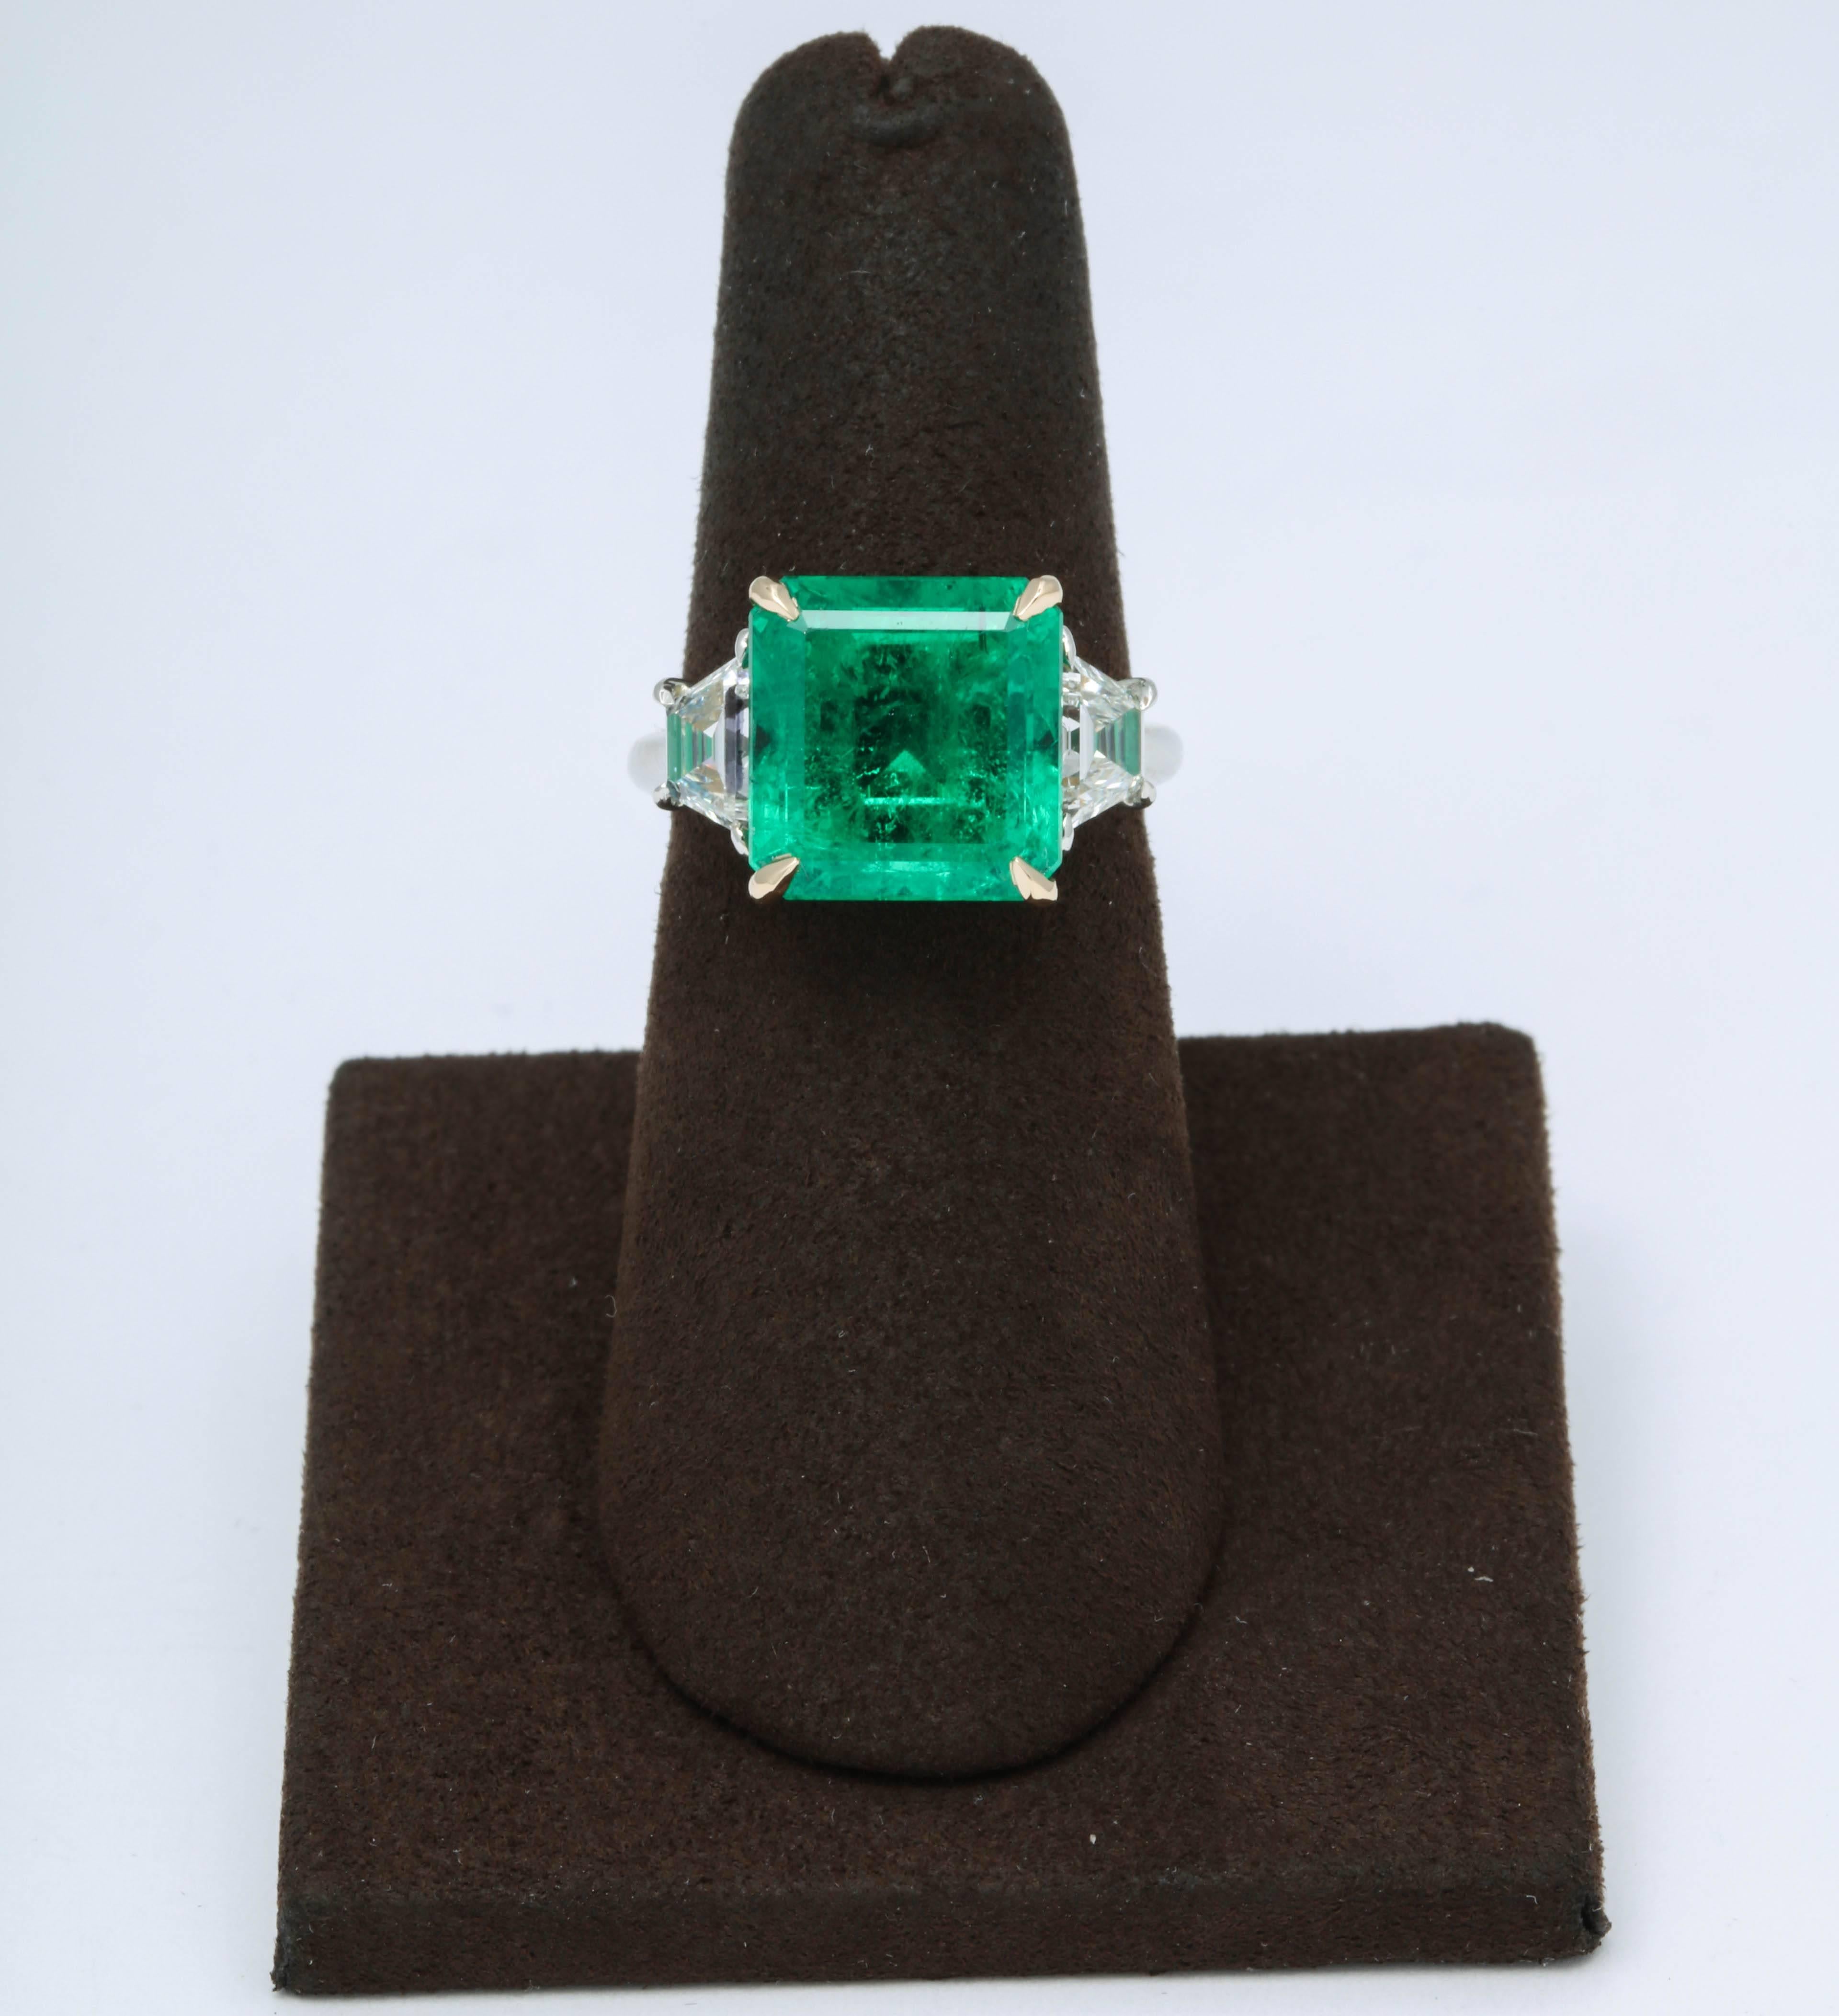 
A very fine emerald ring -- superb color and luster!

6.15 carat GIA certified Colombian Emerald ring F1.

Set in a custom platinum and 18k yellow gold mounting with 1.05 carats of step cut trapezoid diamonds. 

Currently a size 6, this ring can